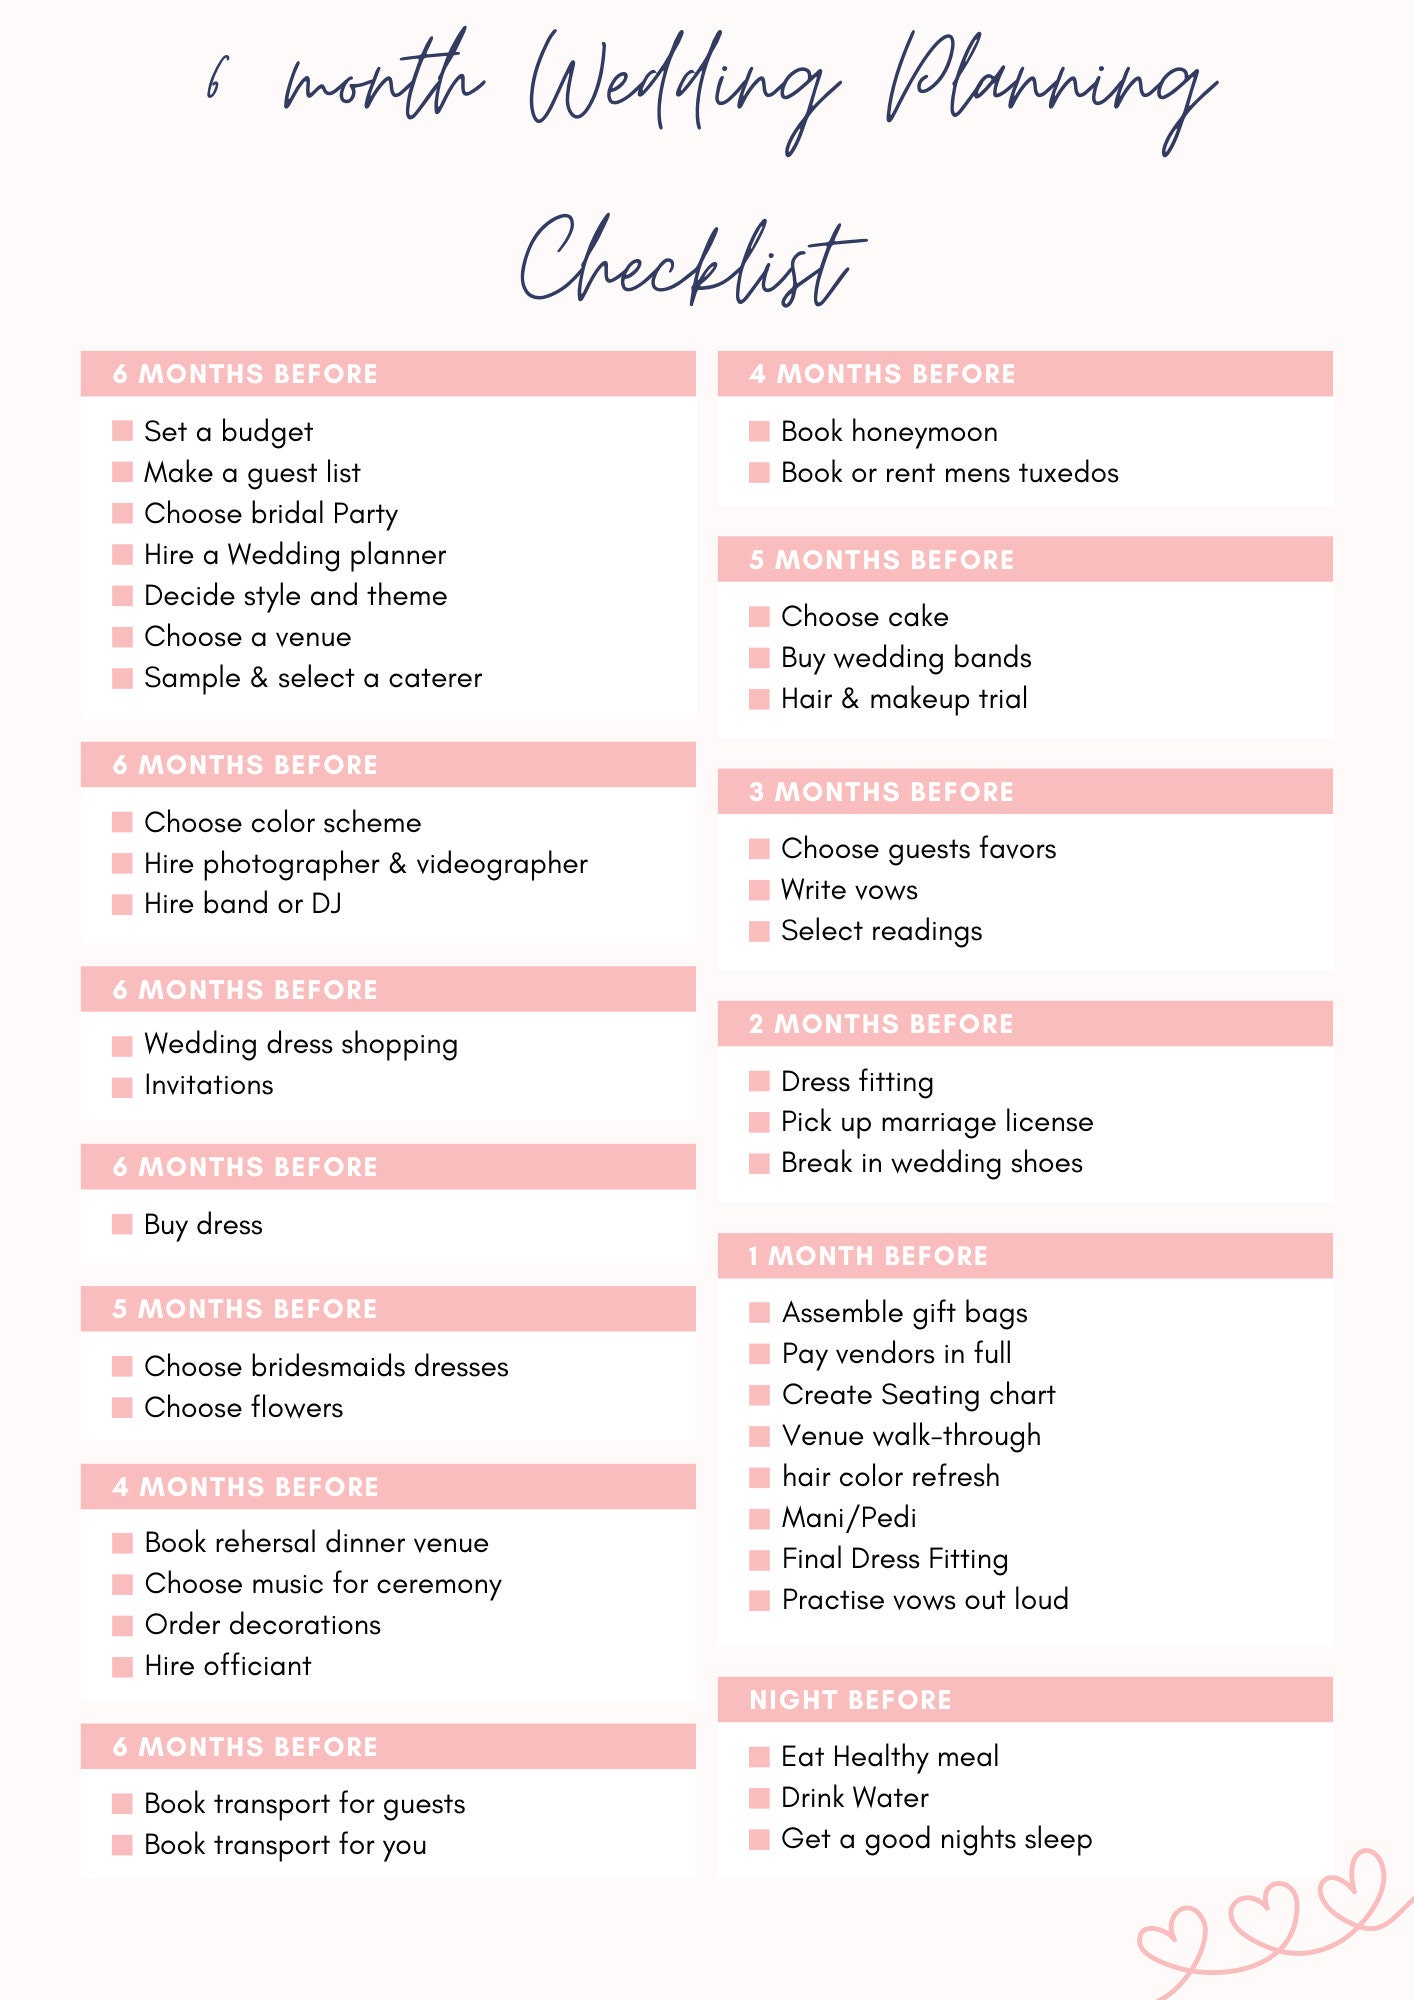 Free Printable Wedding Planning Checklist For 3 Months Before Your 